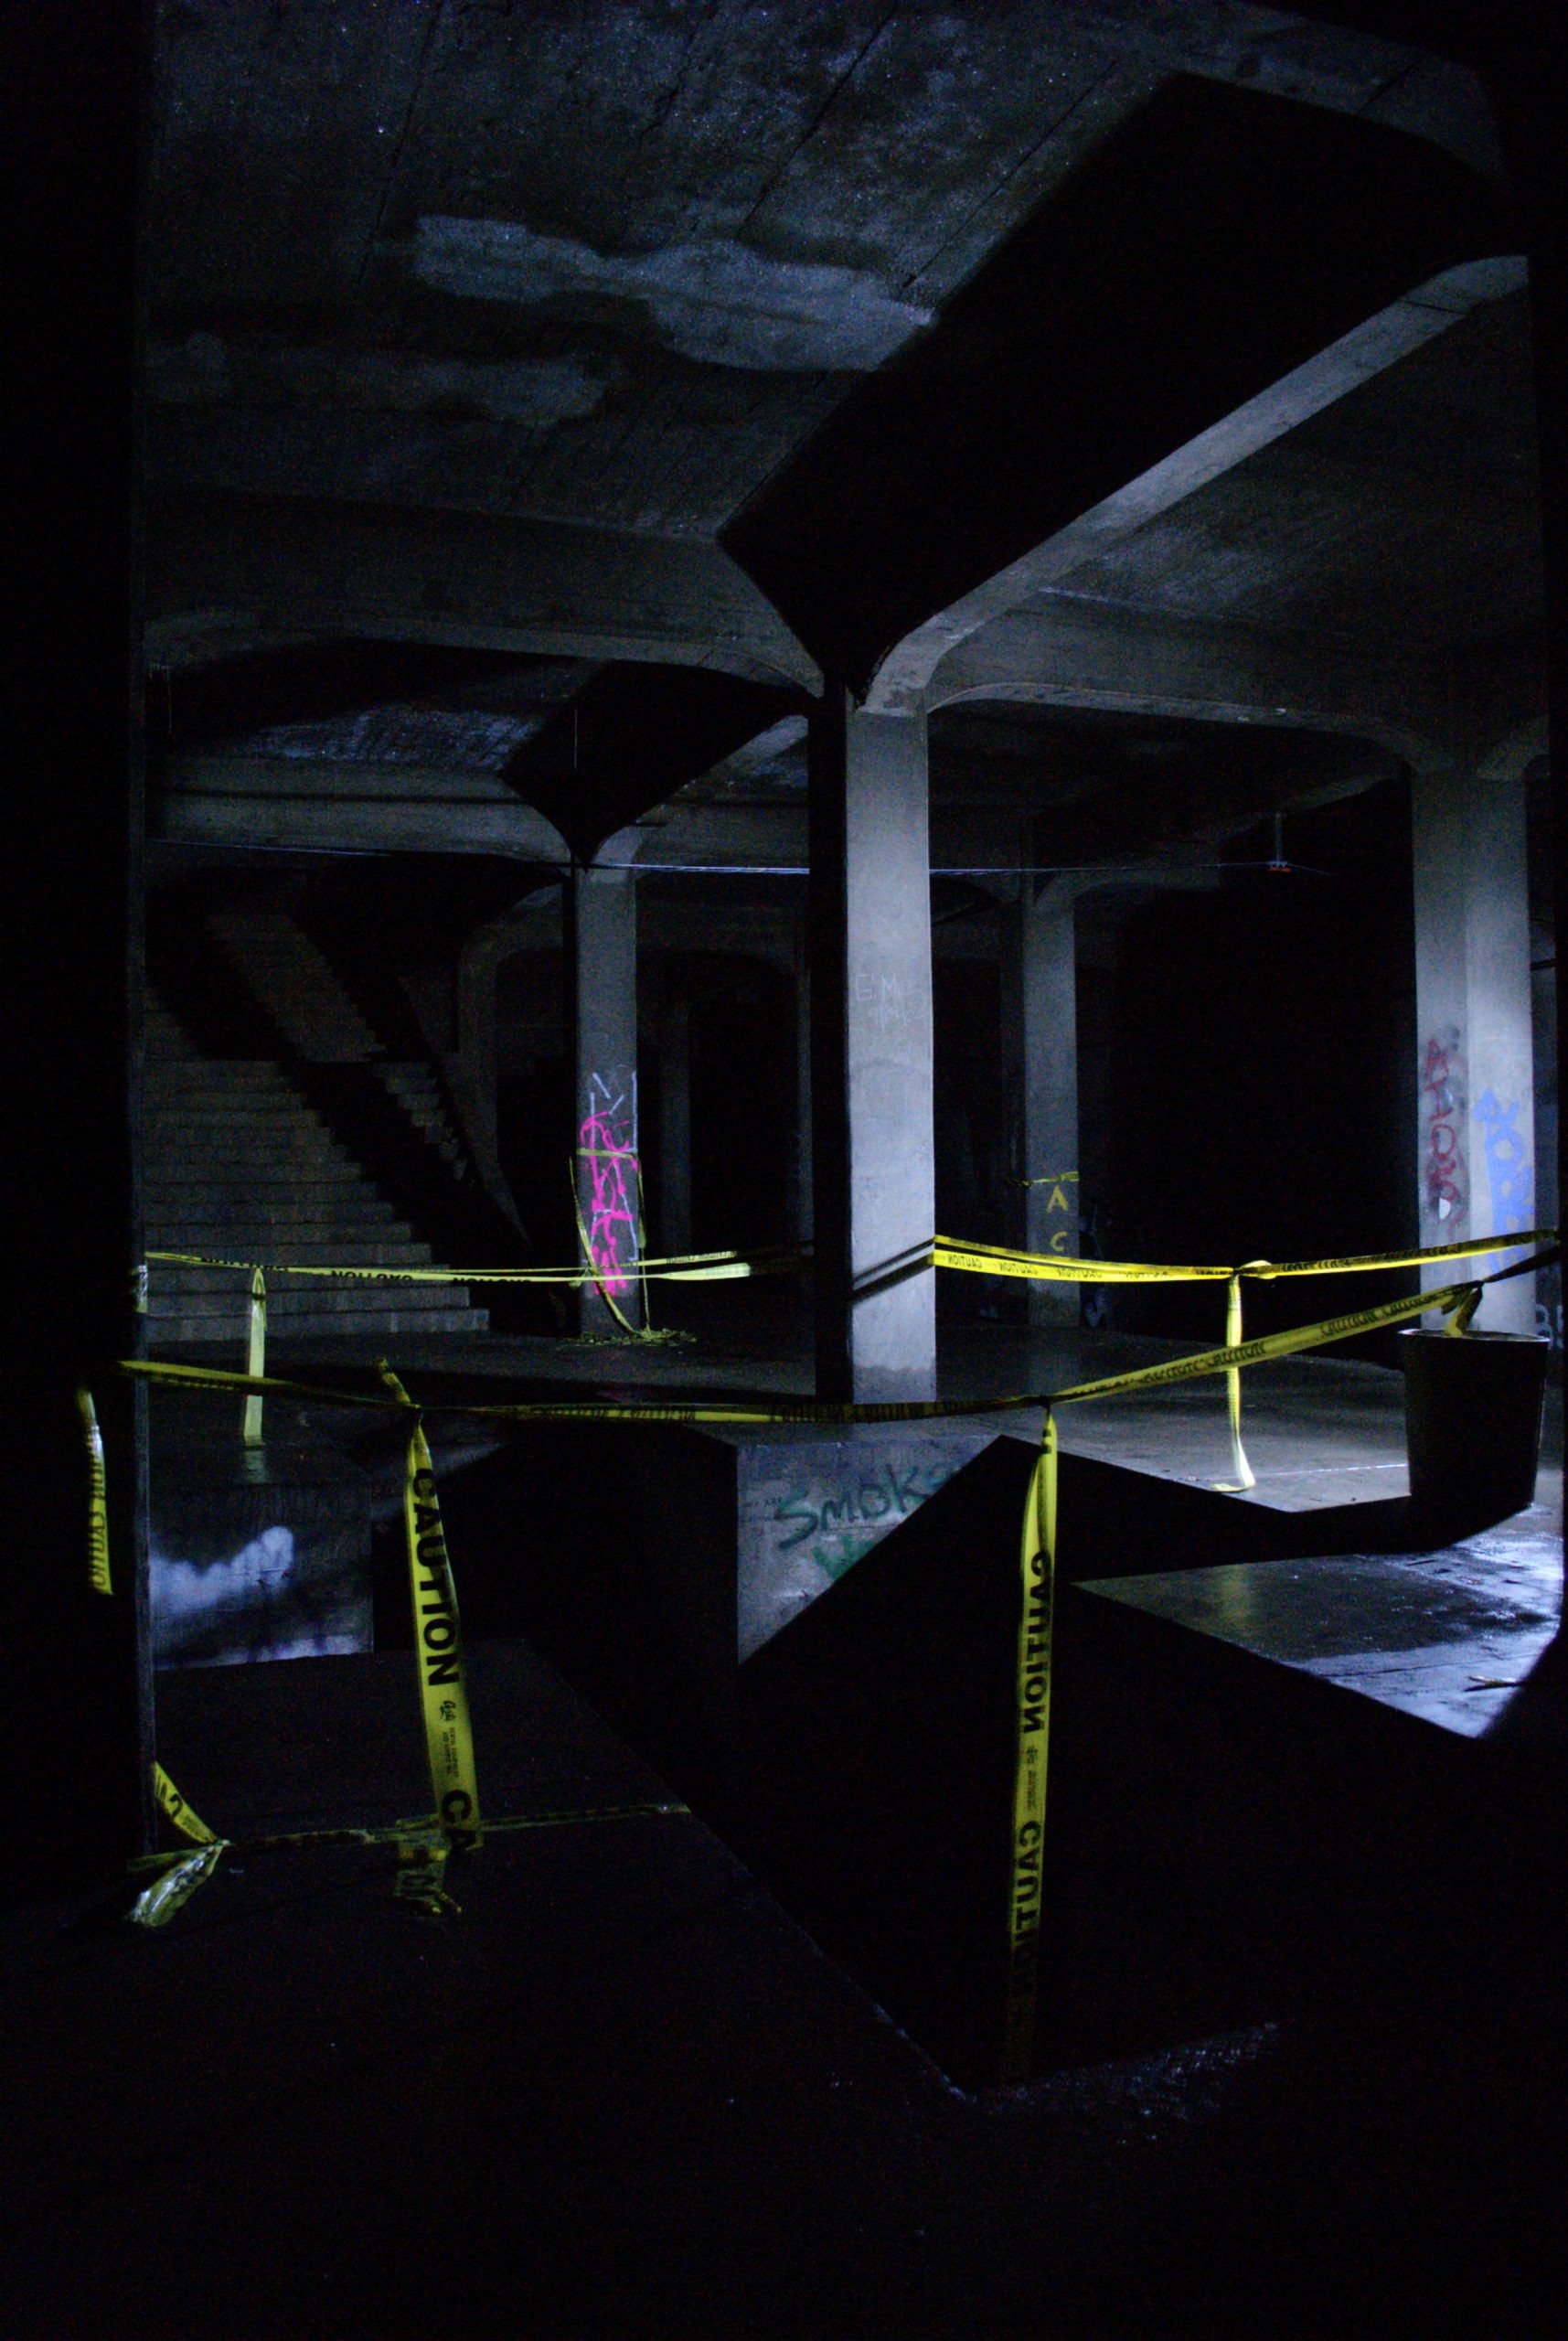 A dark, empty platform wrapped in yellow "Caution" tape in the abandoned Cincinnati Subway.